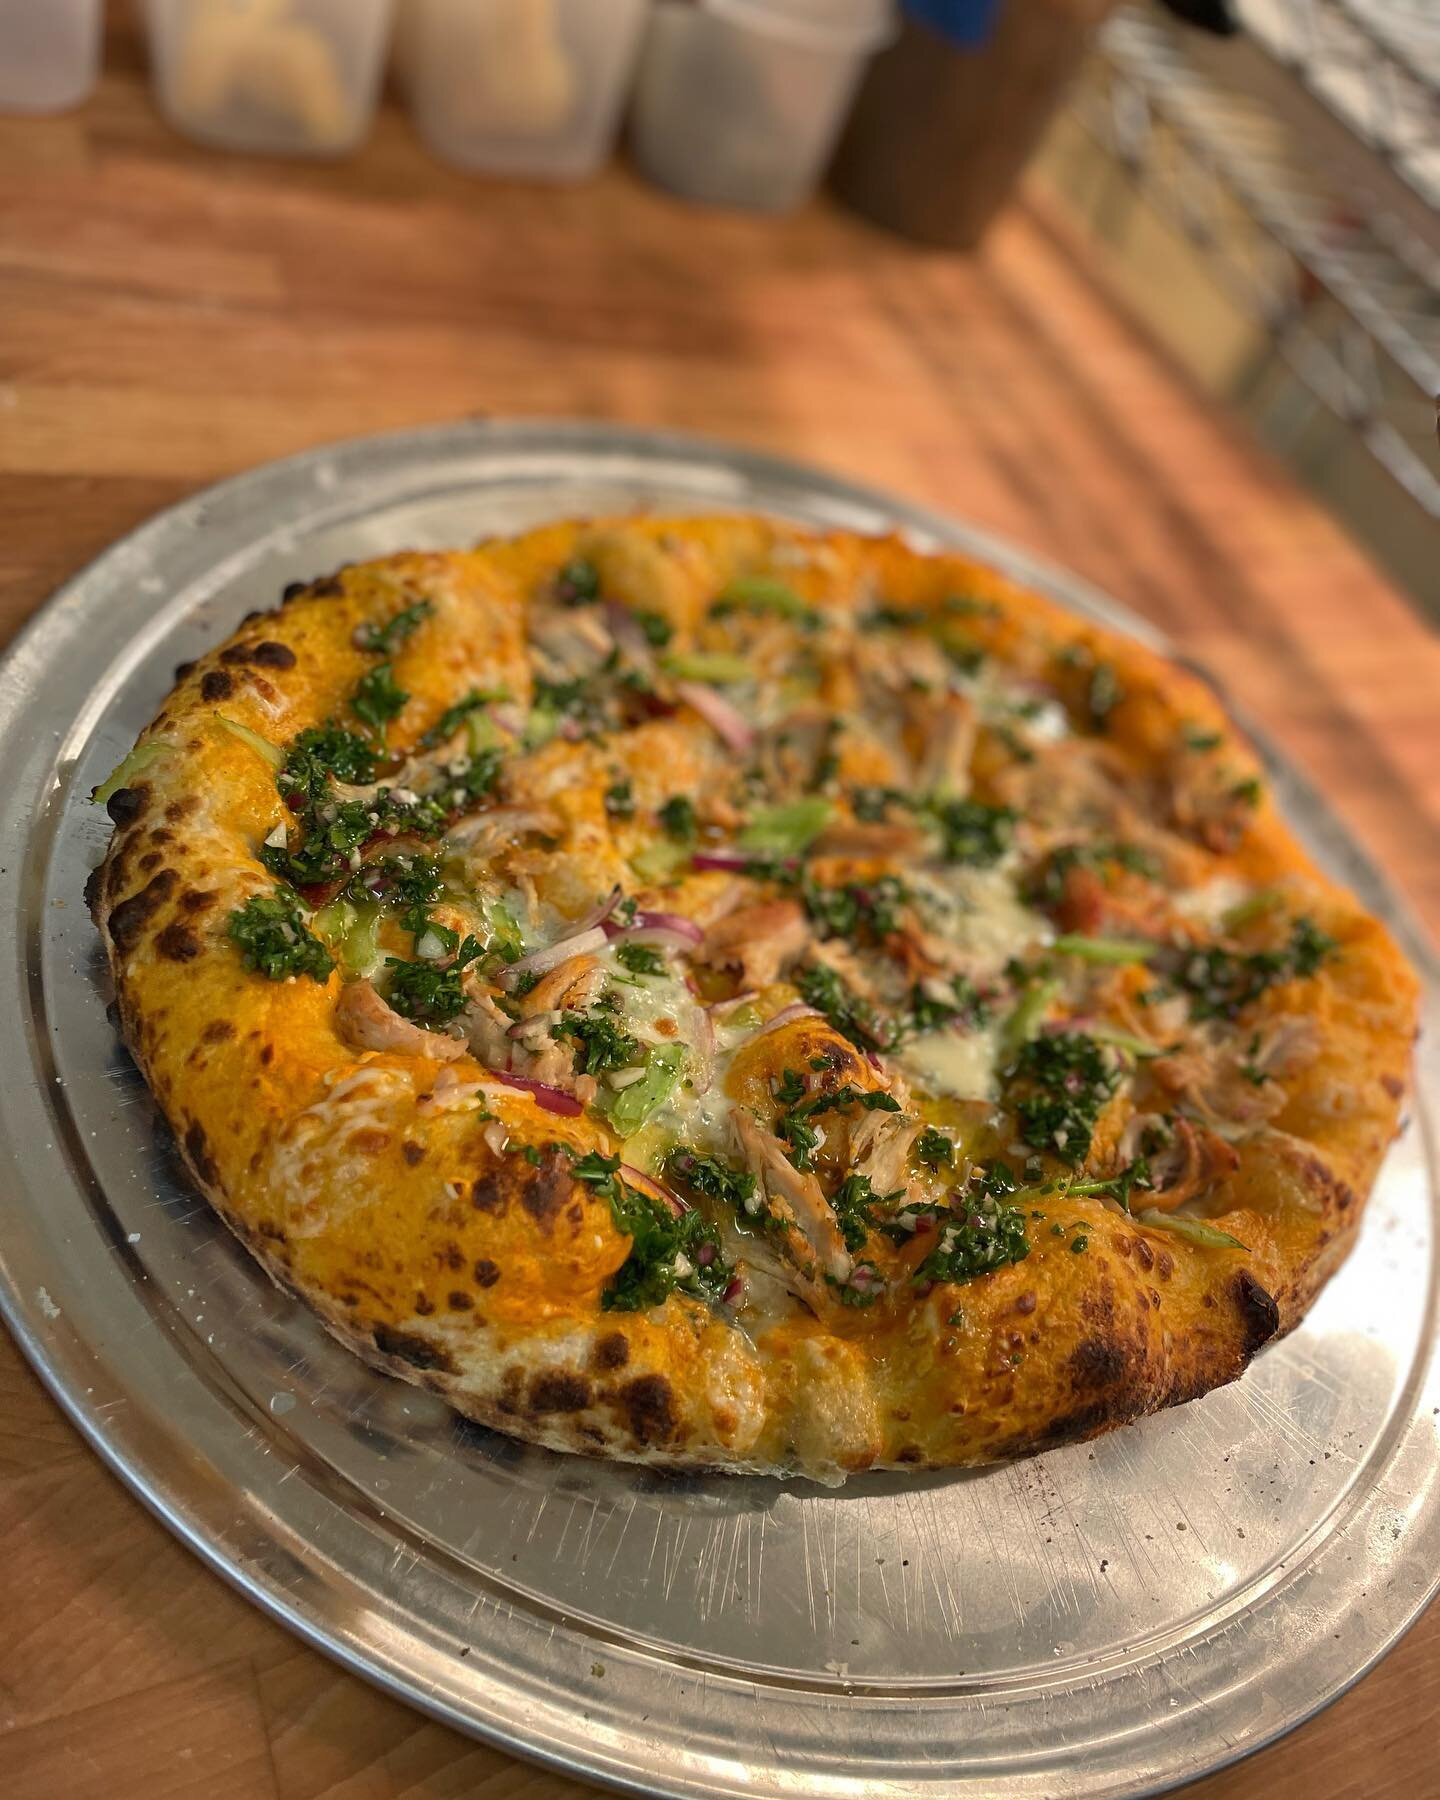 Pizza - a well rounded meal 🍽

This month&rsquo;s pizza: Buffalo Sauce, Roasted Chicken, Cilantro, Red Onion and a side of Ranch 

Open 4-8pm

Online ordering at brutemke.com